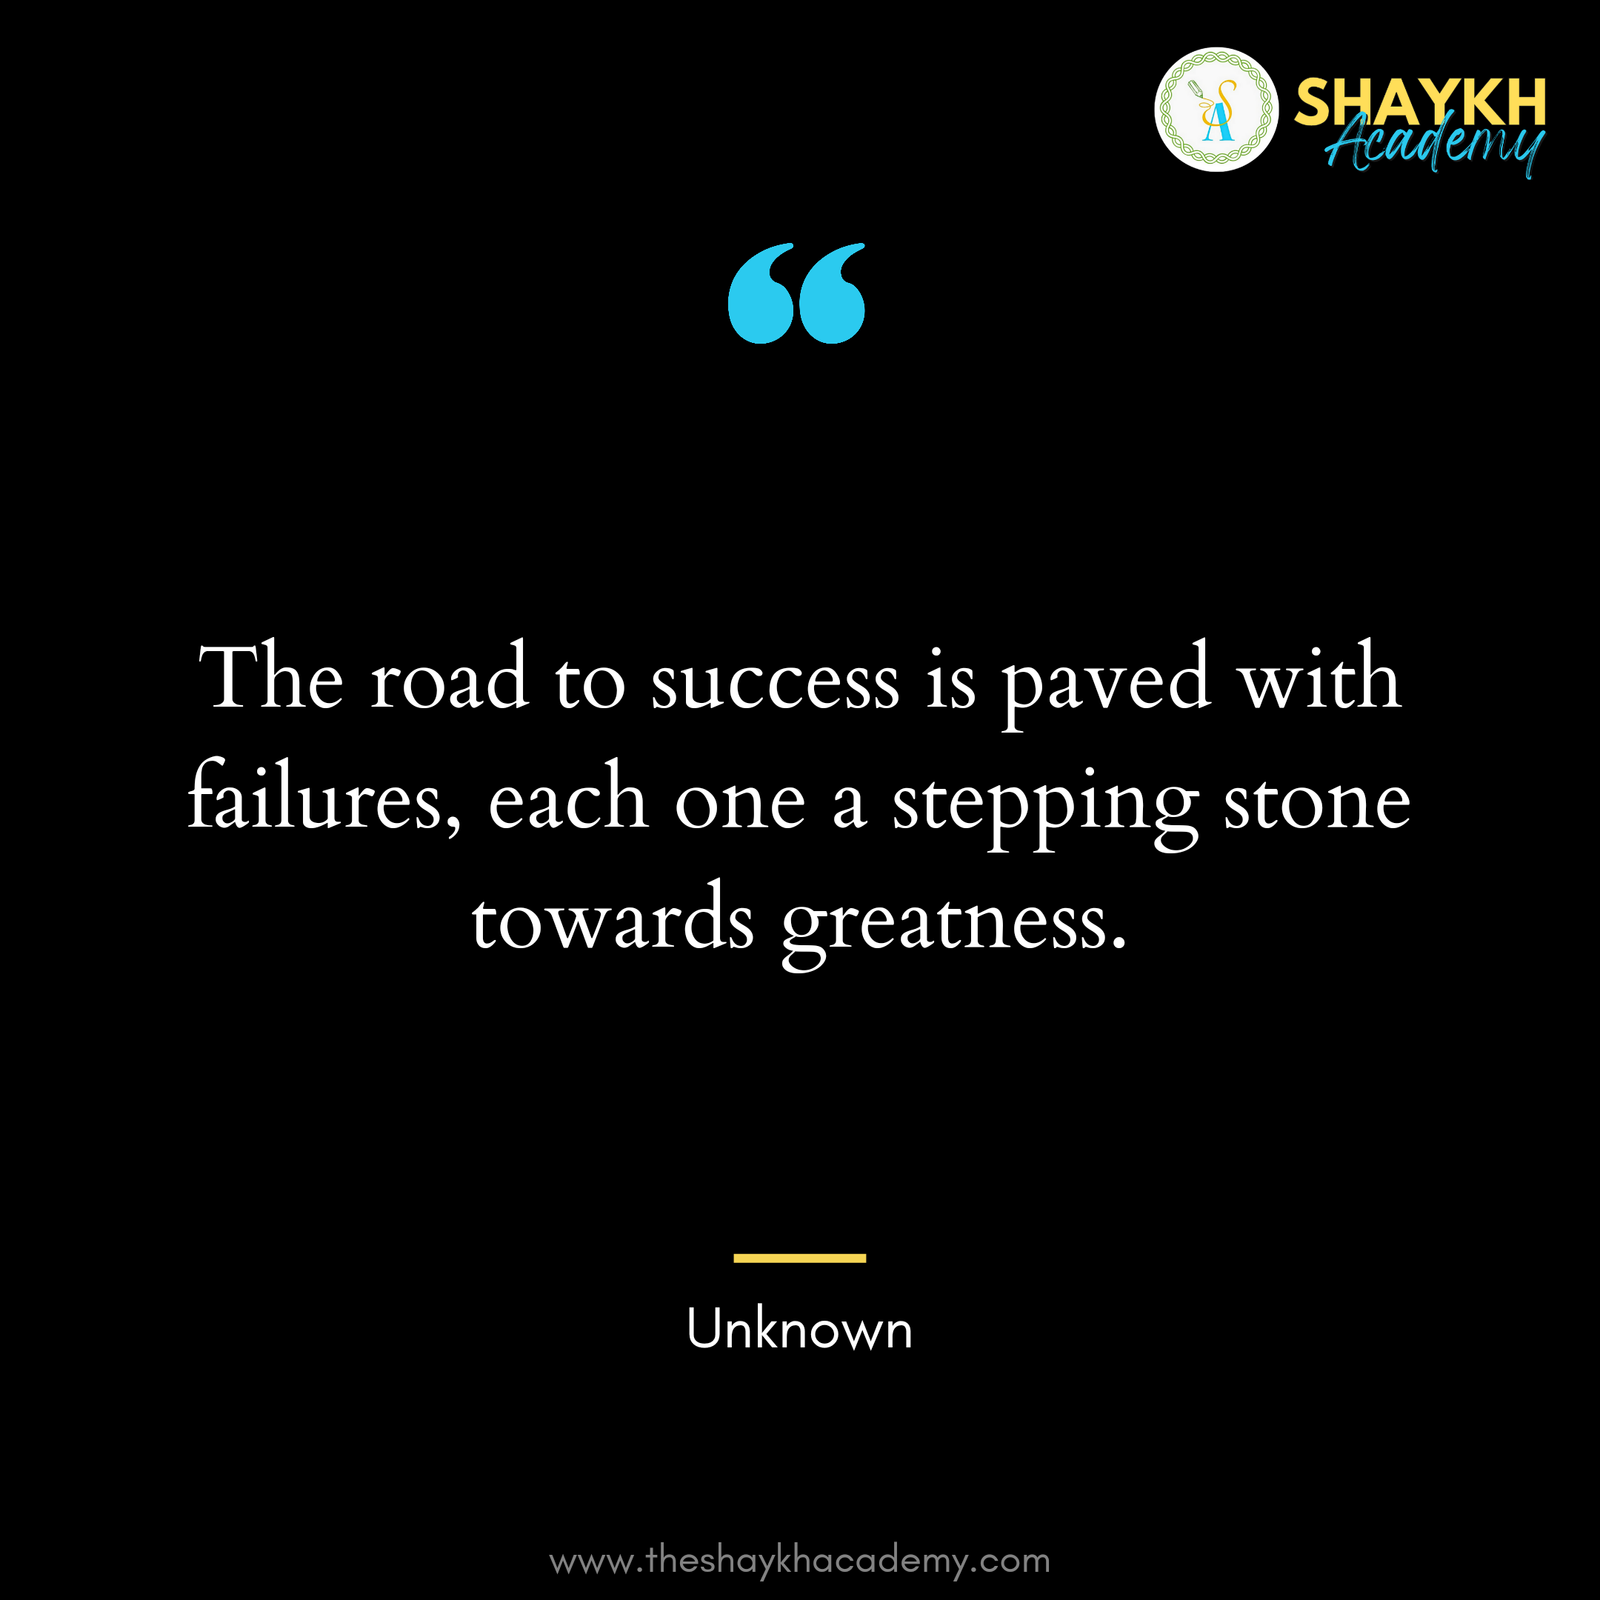 The road to success is paved with failures, each one a stepping stone towards greatness.